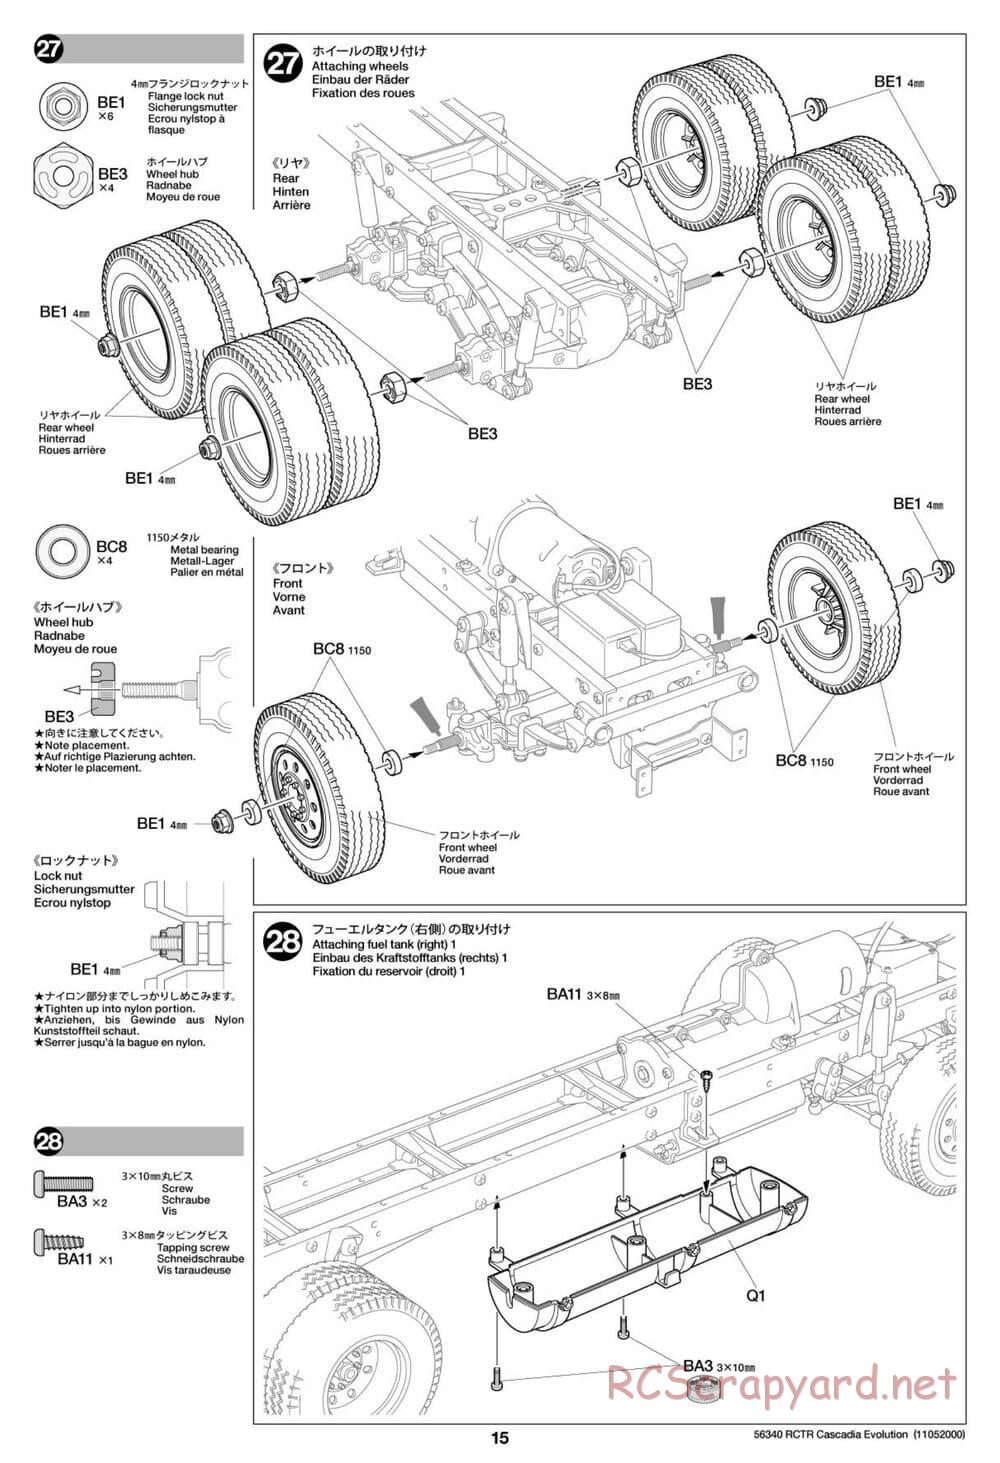 Tamiya - Freightliner Cascadia Evolution Tractor Truck Chassis - Manual - Page 15